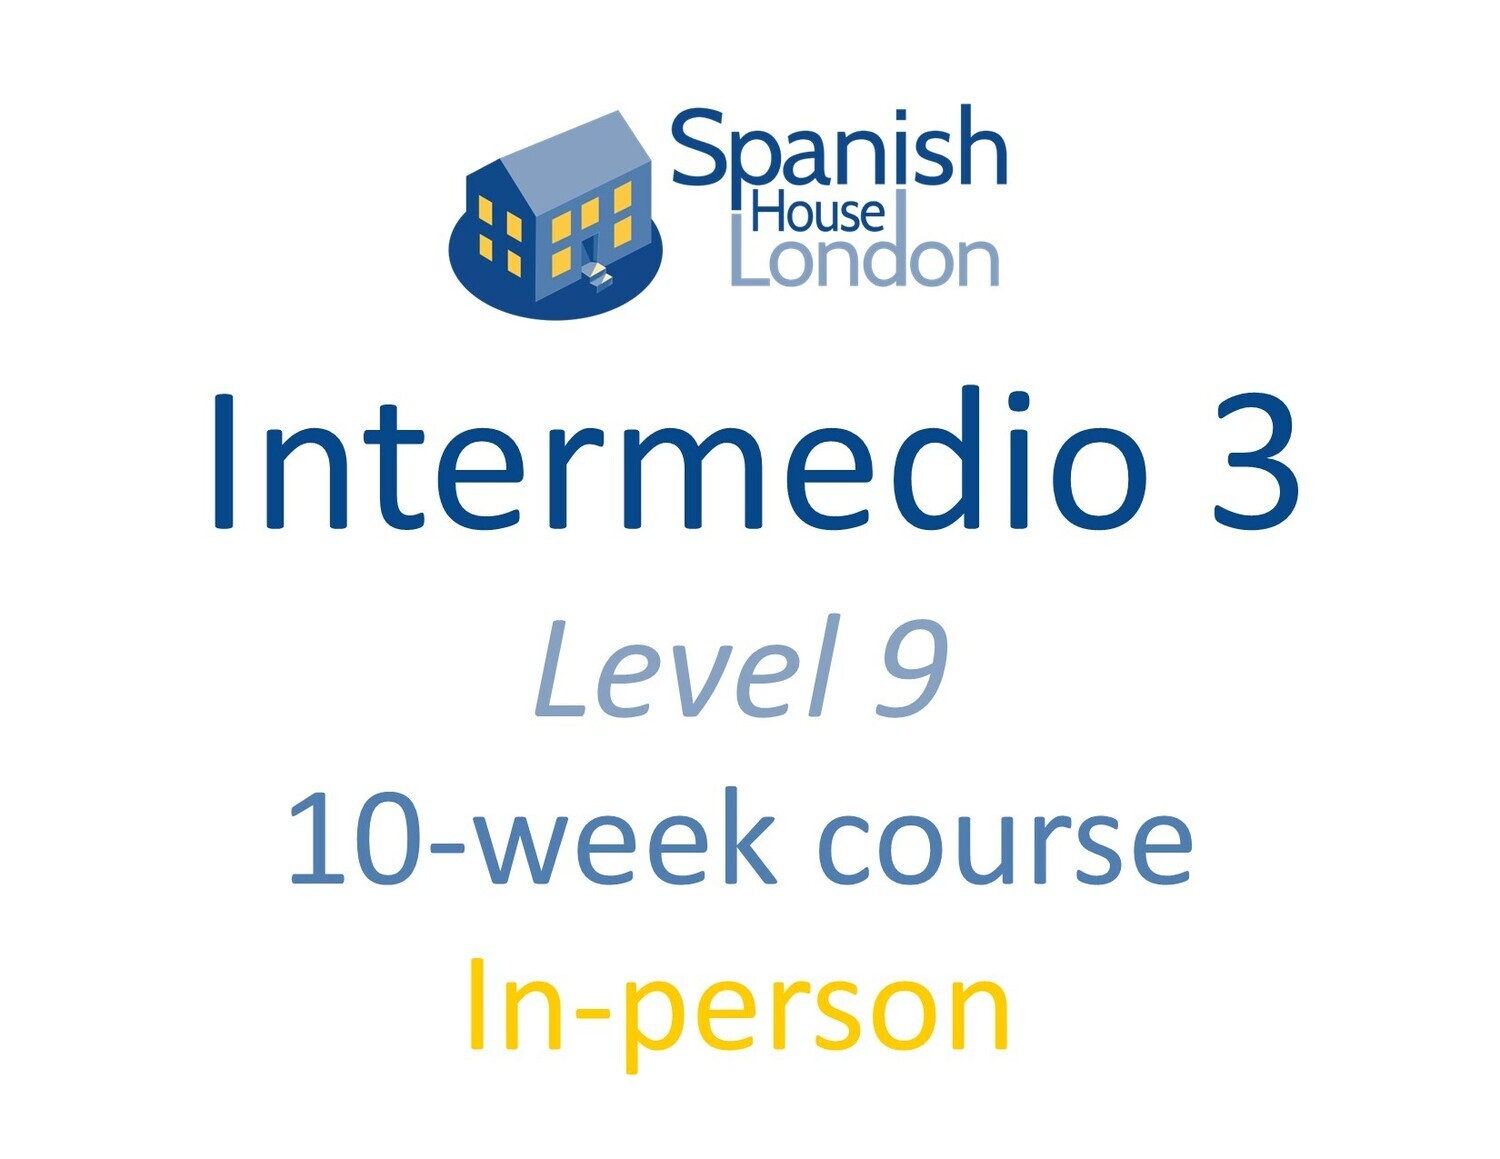 Intermedio 3 Course starting on 21st March at 6pm in Euston / King's Cross